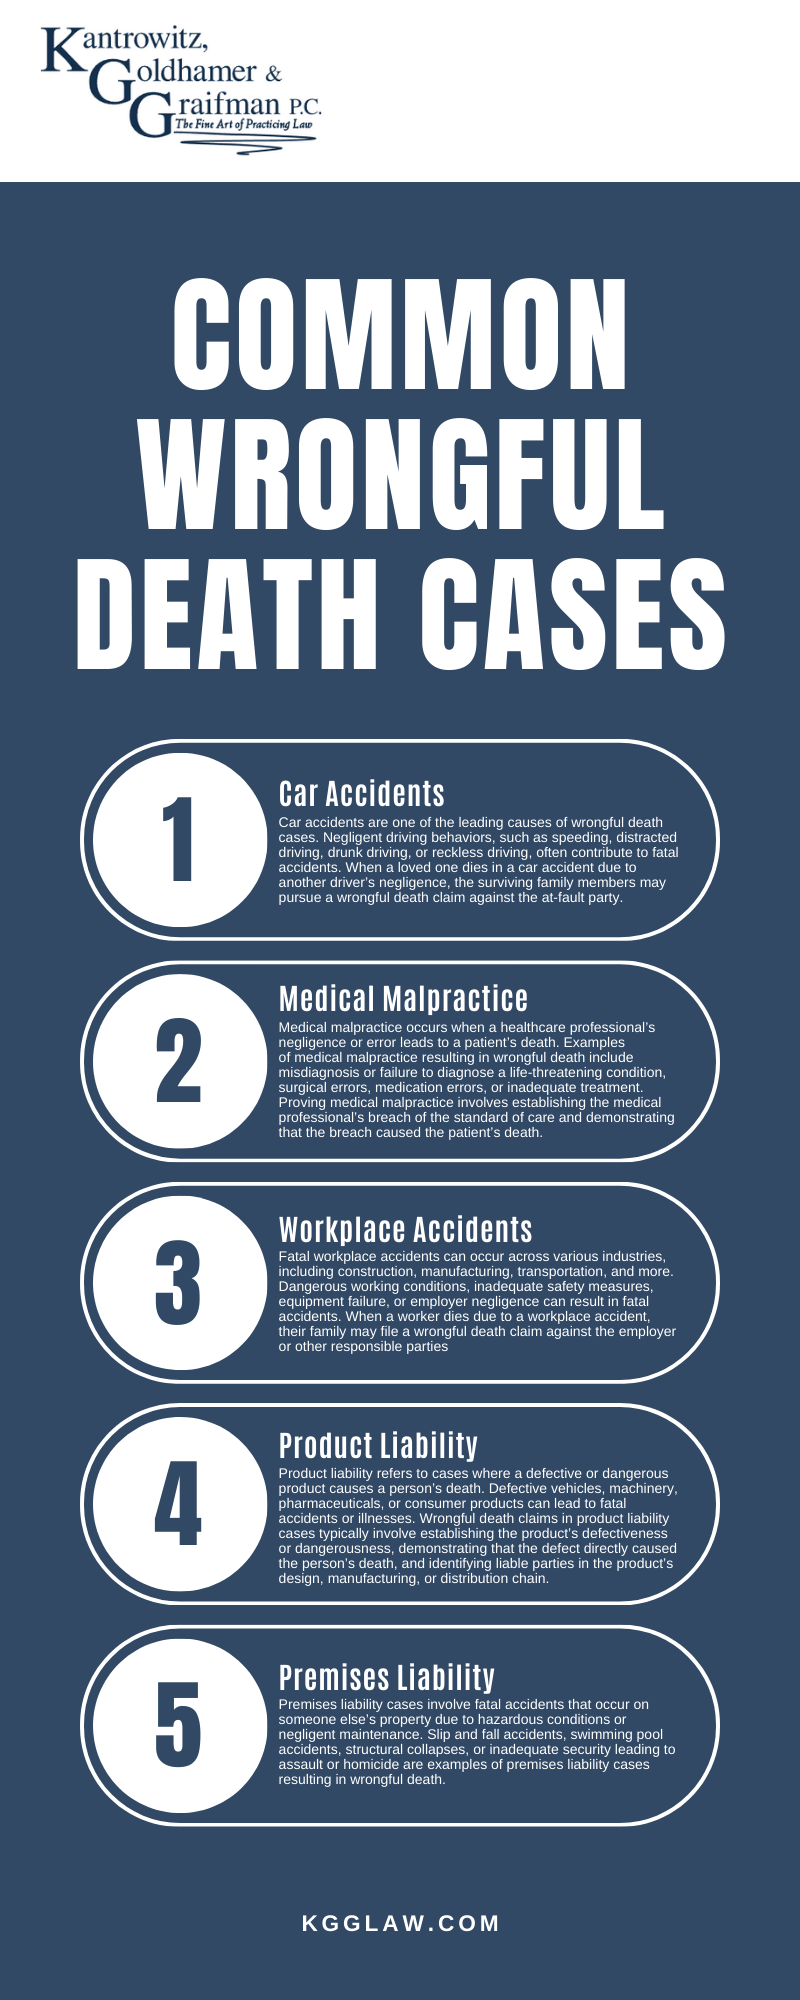 Common Wrongful Death Cases Infographic